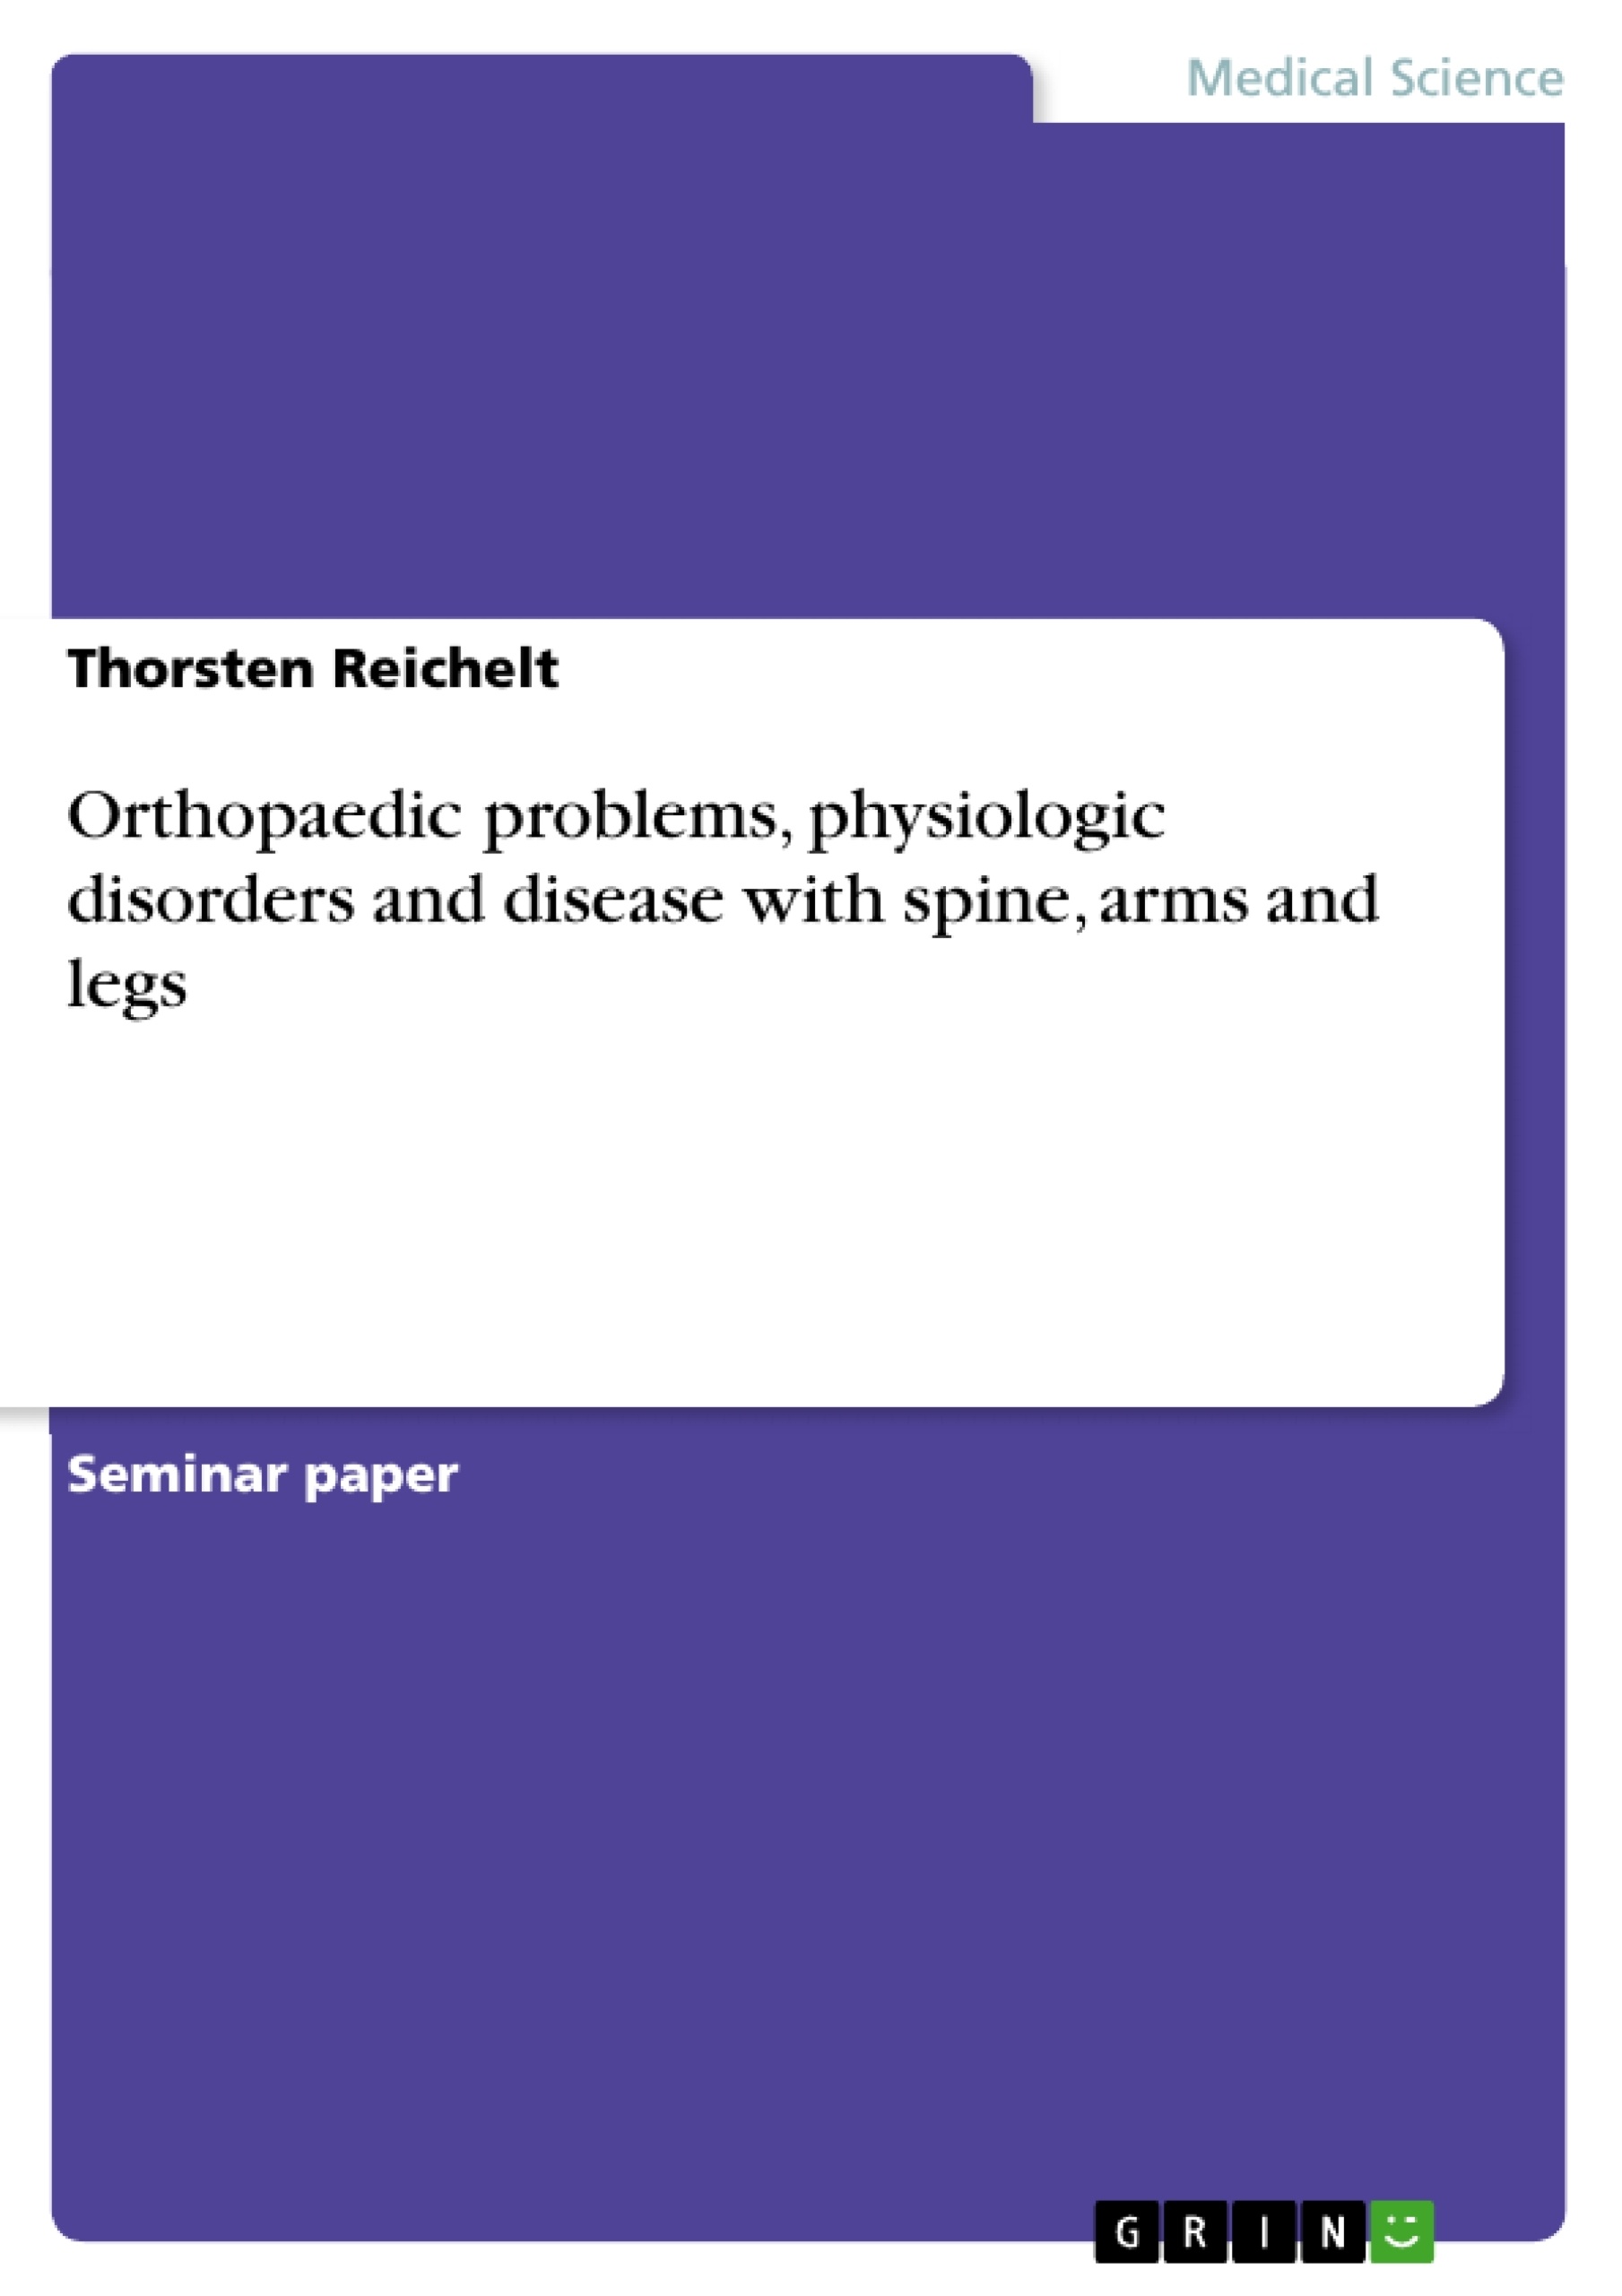 Title: Orthopaedic problems, physiologic disorders and disease with spine, arms and legs